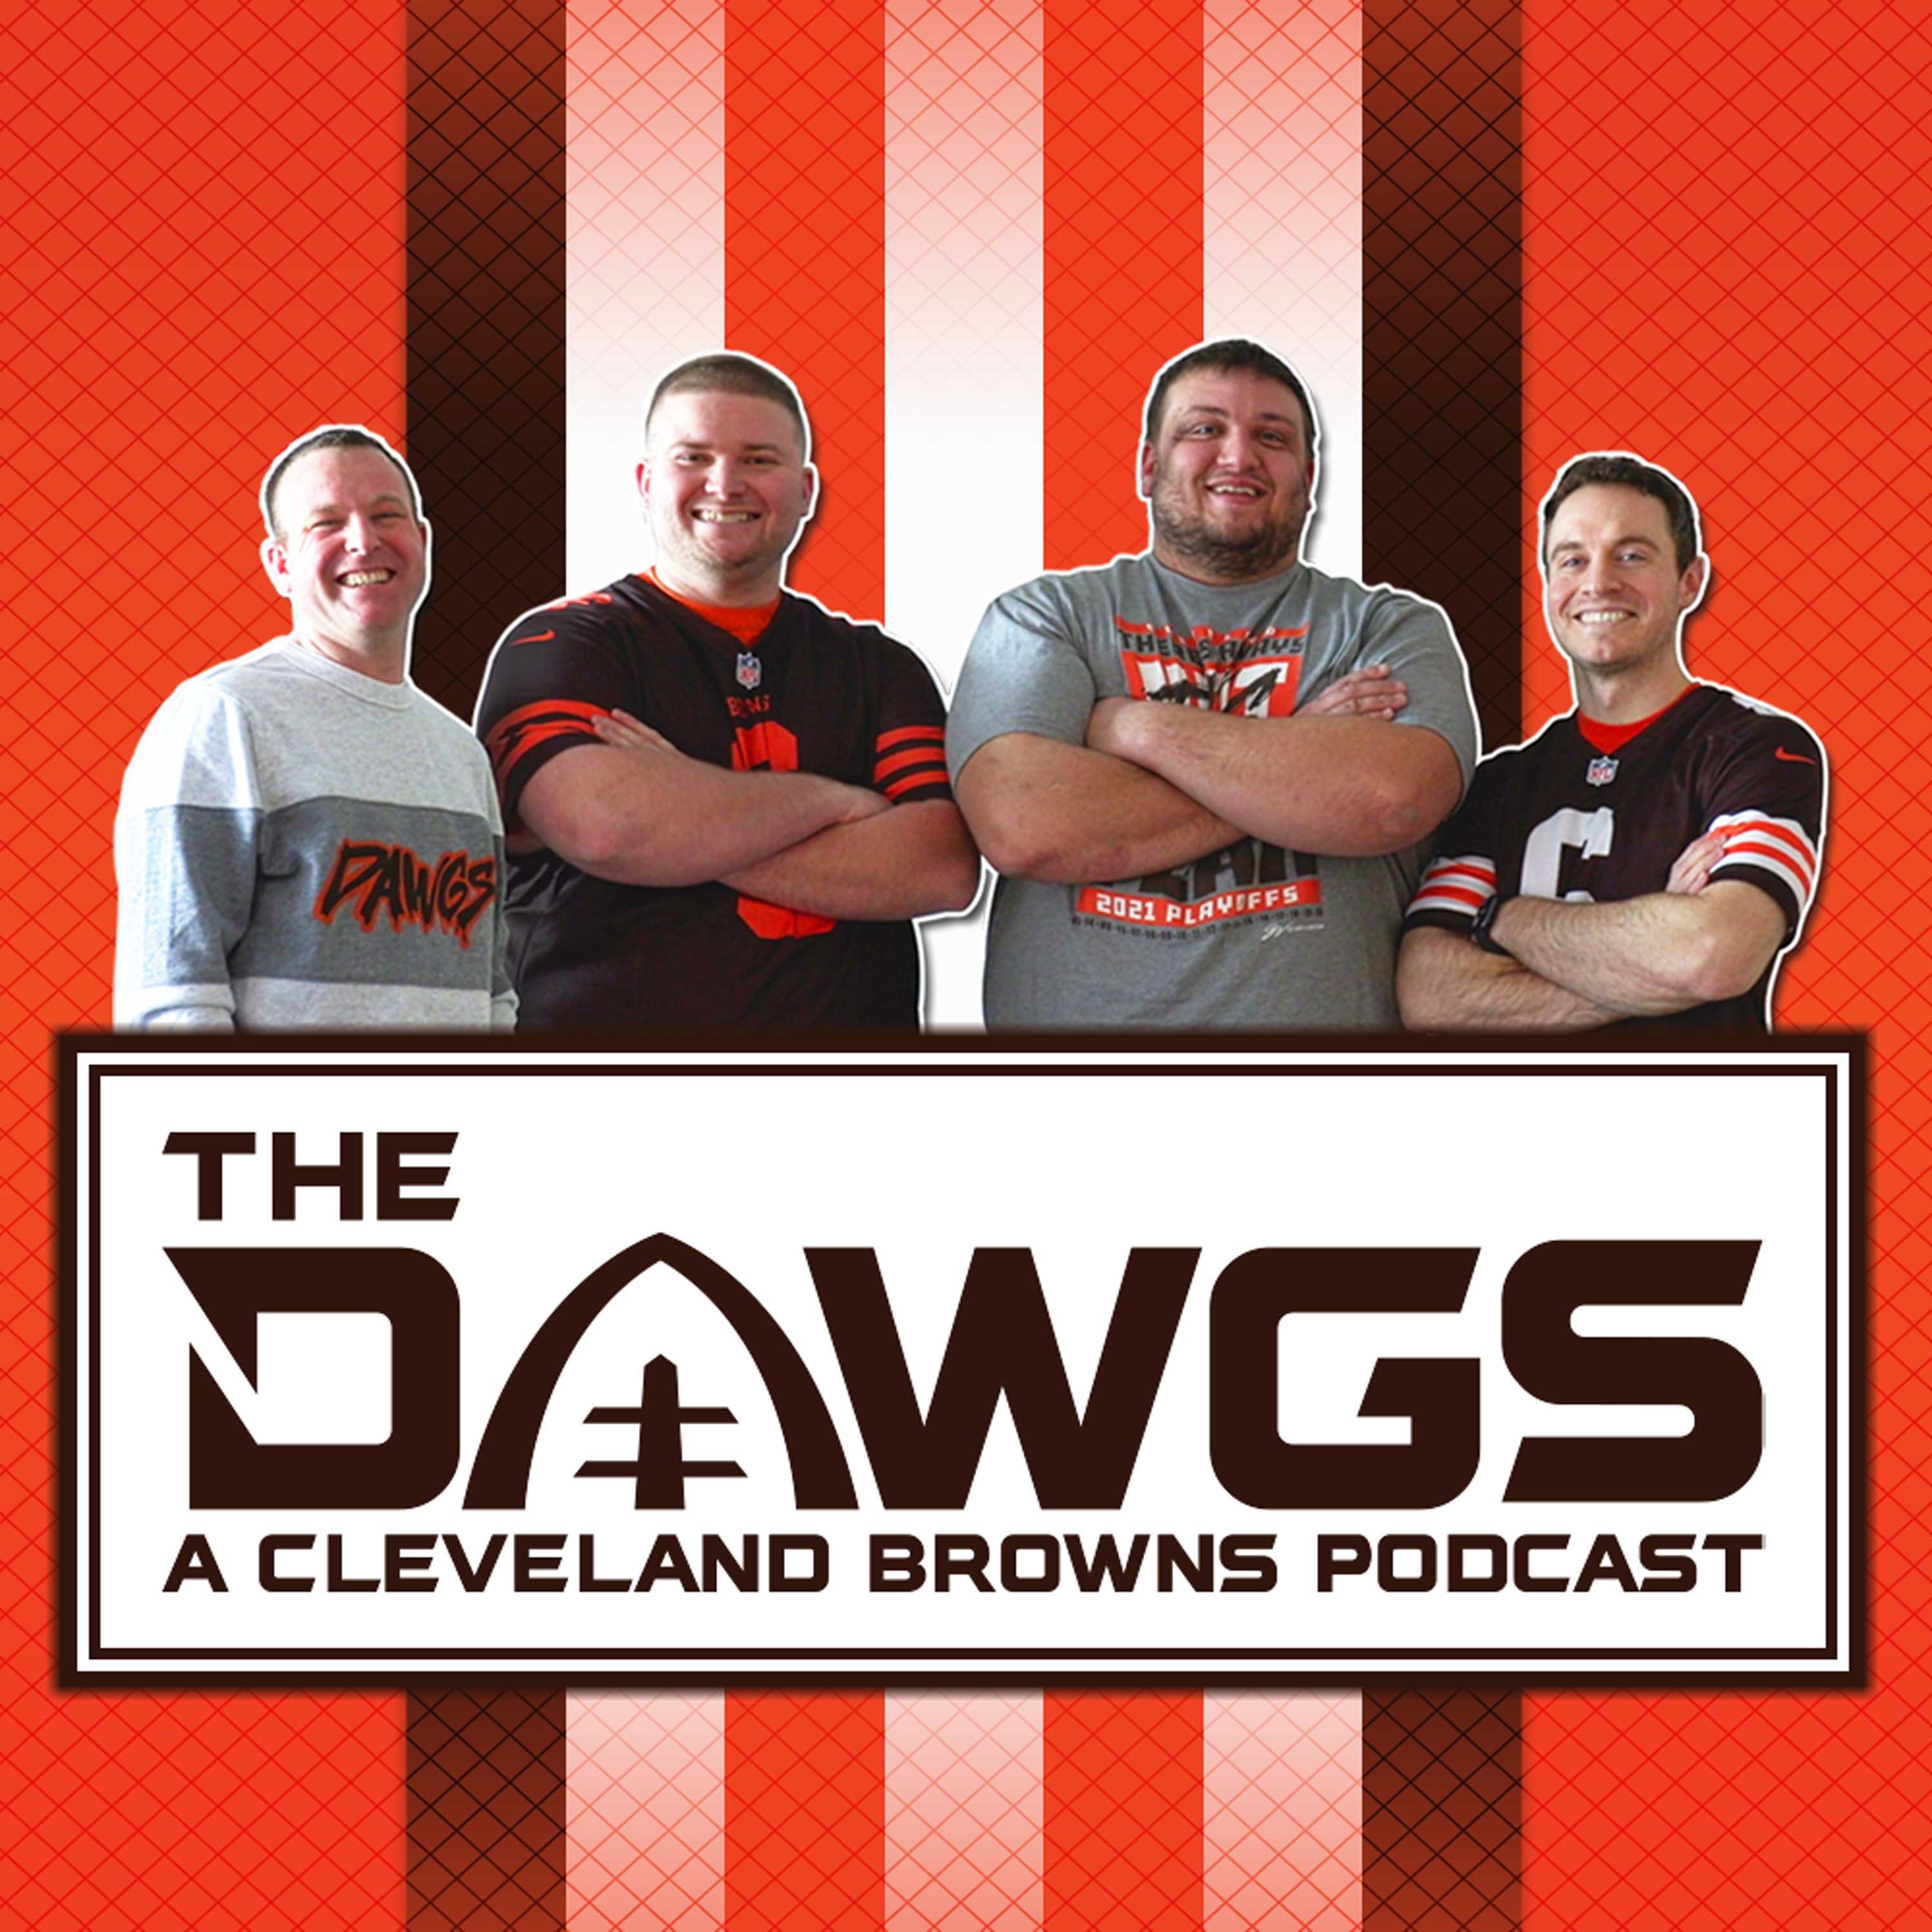 Deshaun Watson’s Legal Situation and How He Became a Brown | The Dawgs - A Cleveland Browns Podcast - March 24, 2022